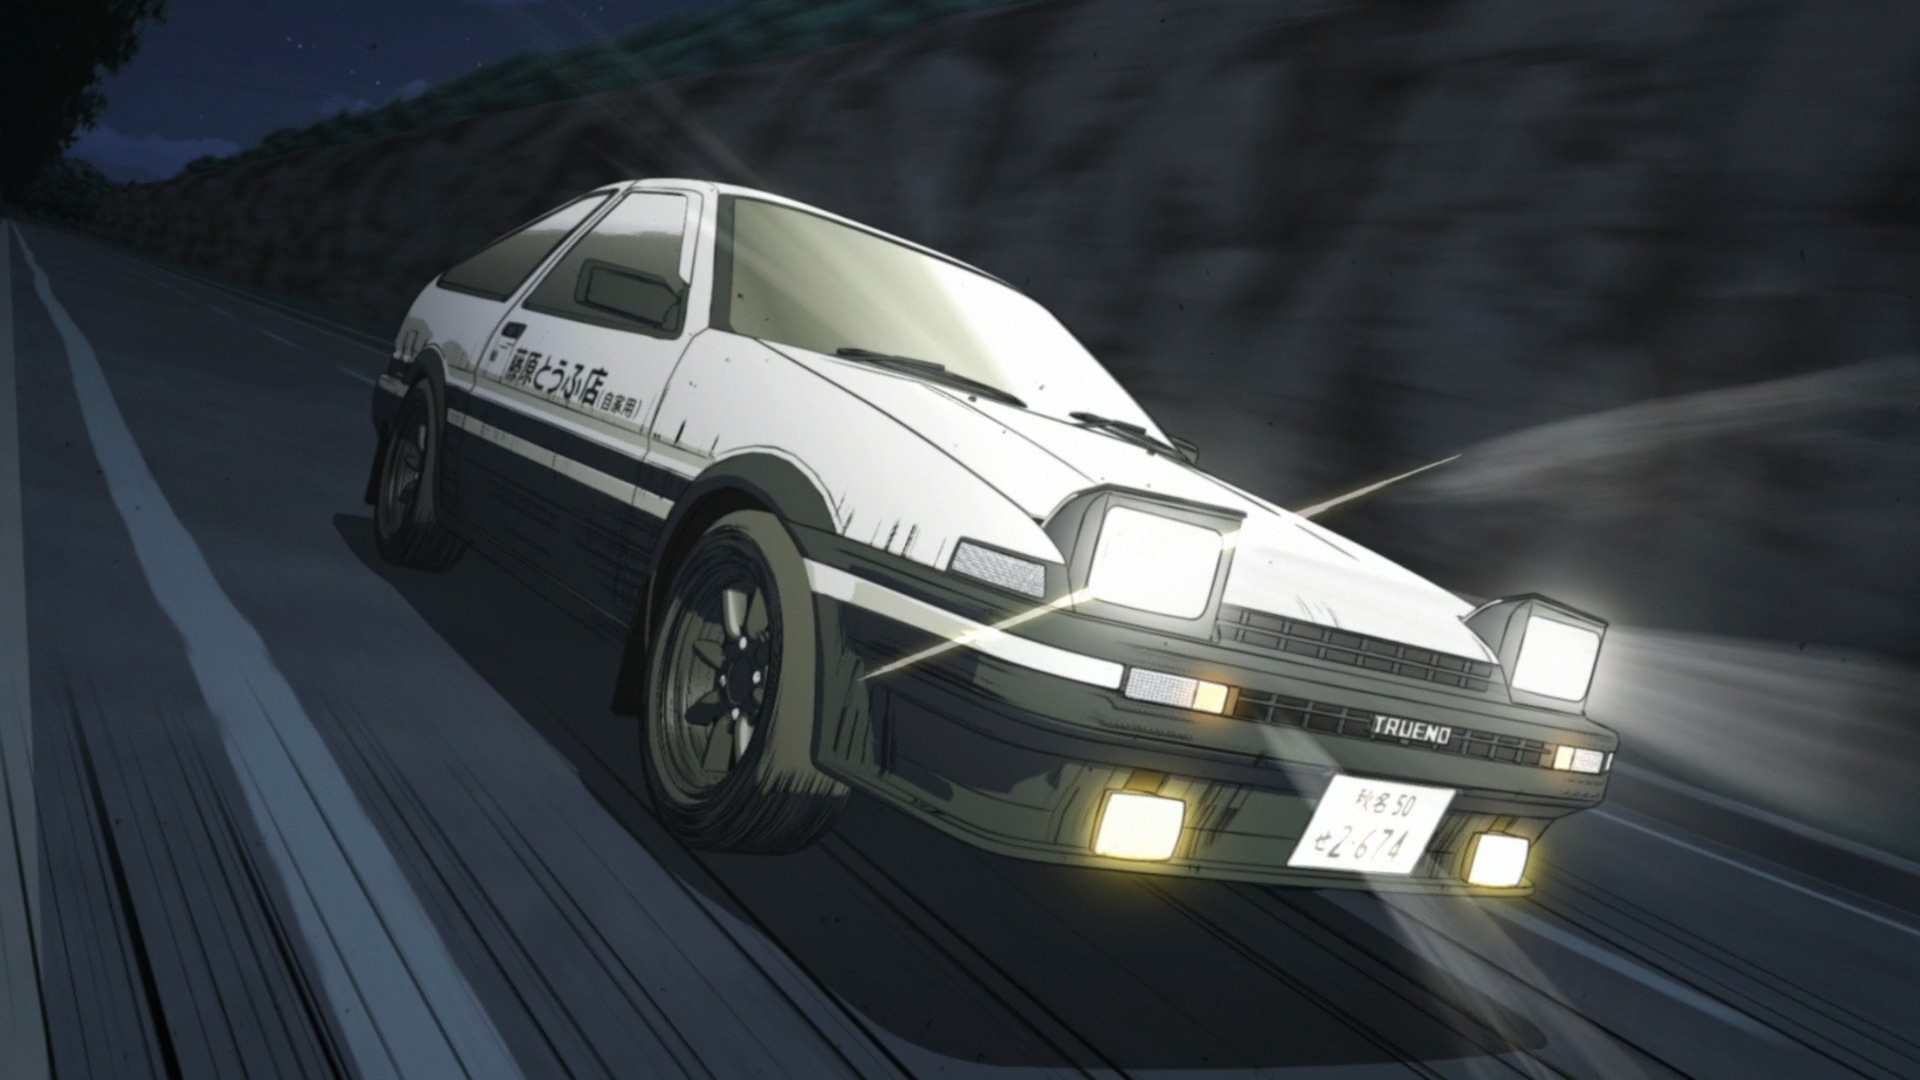 Download Game Initial D Pc